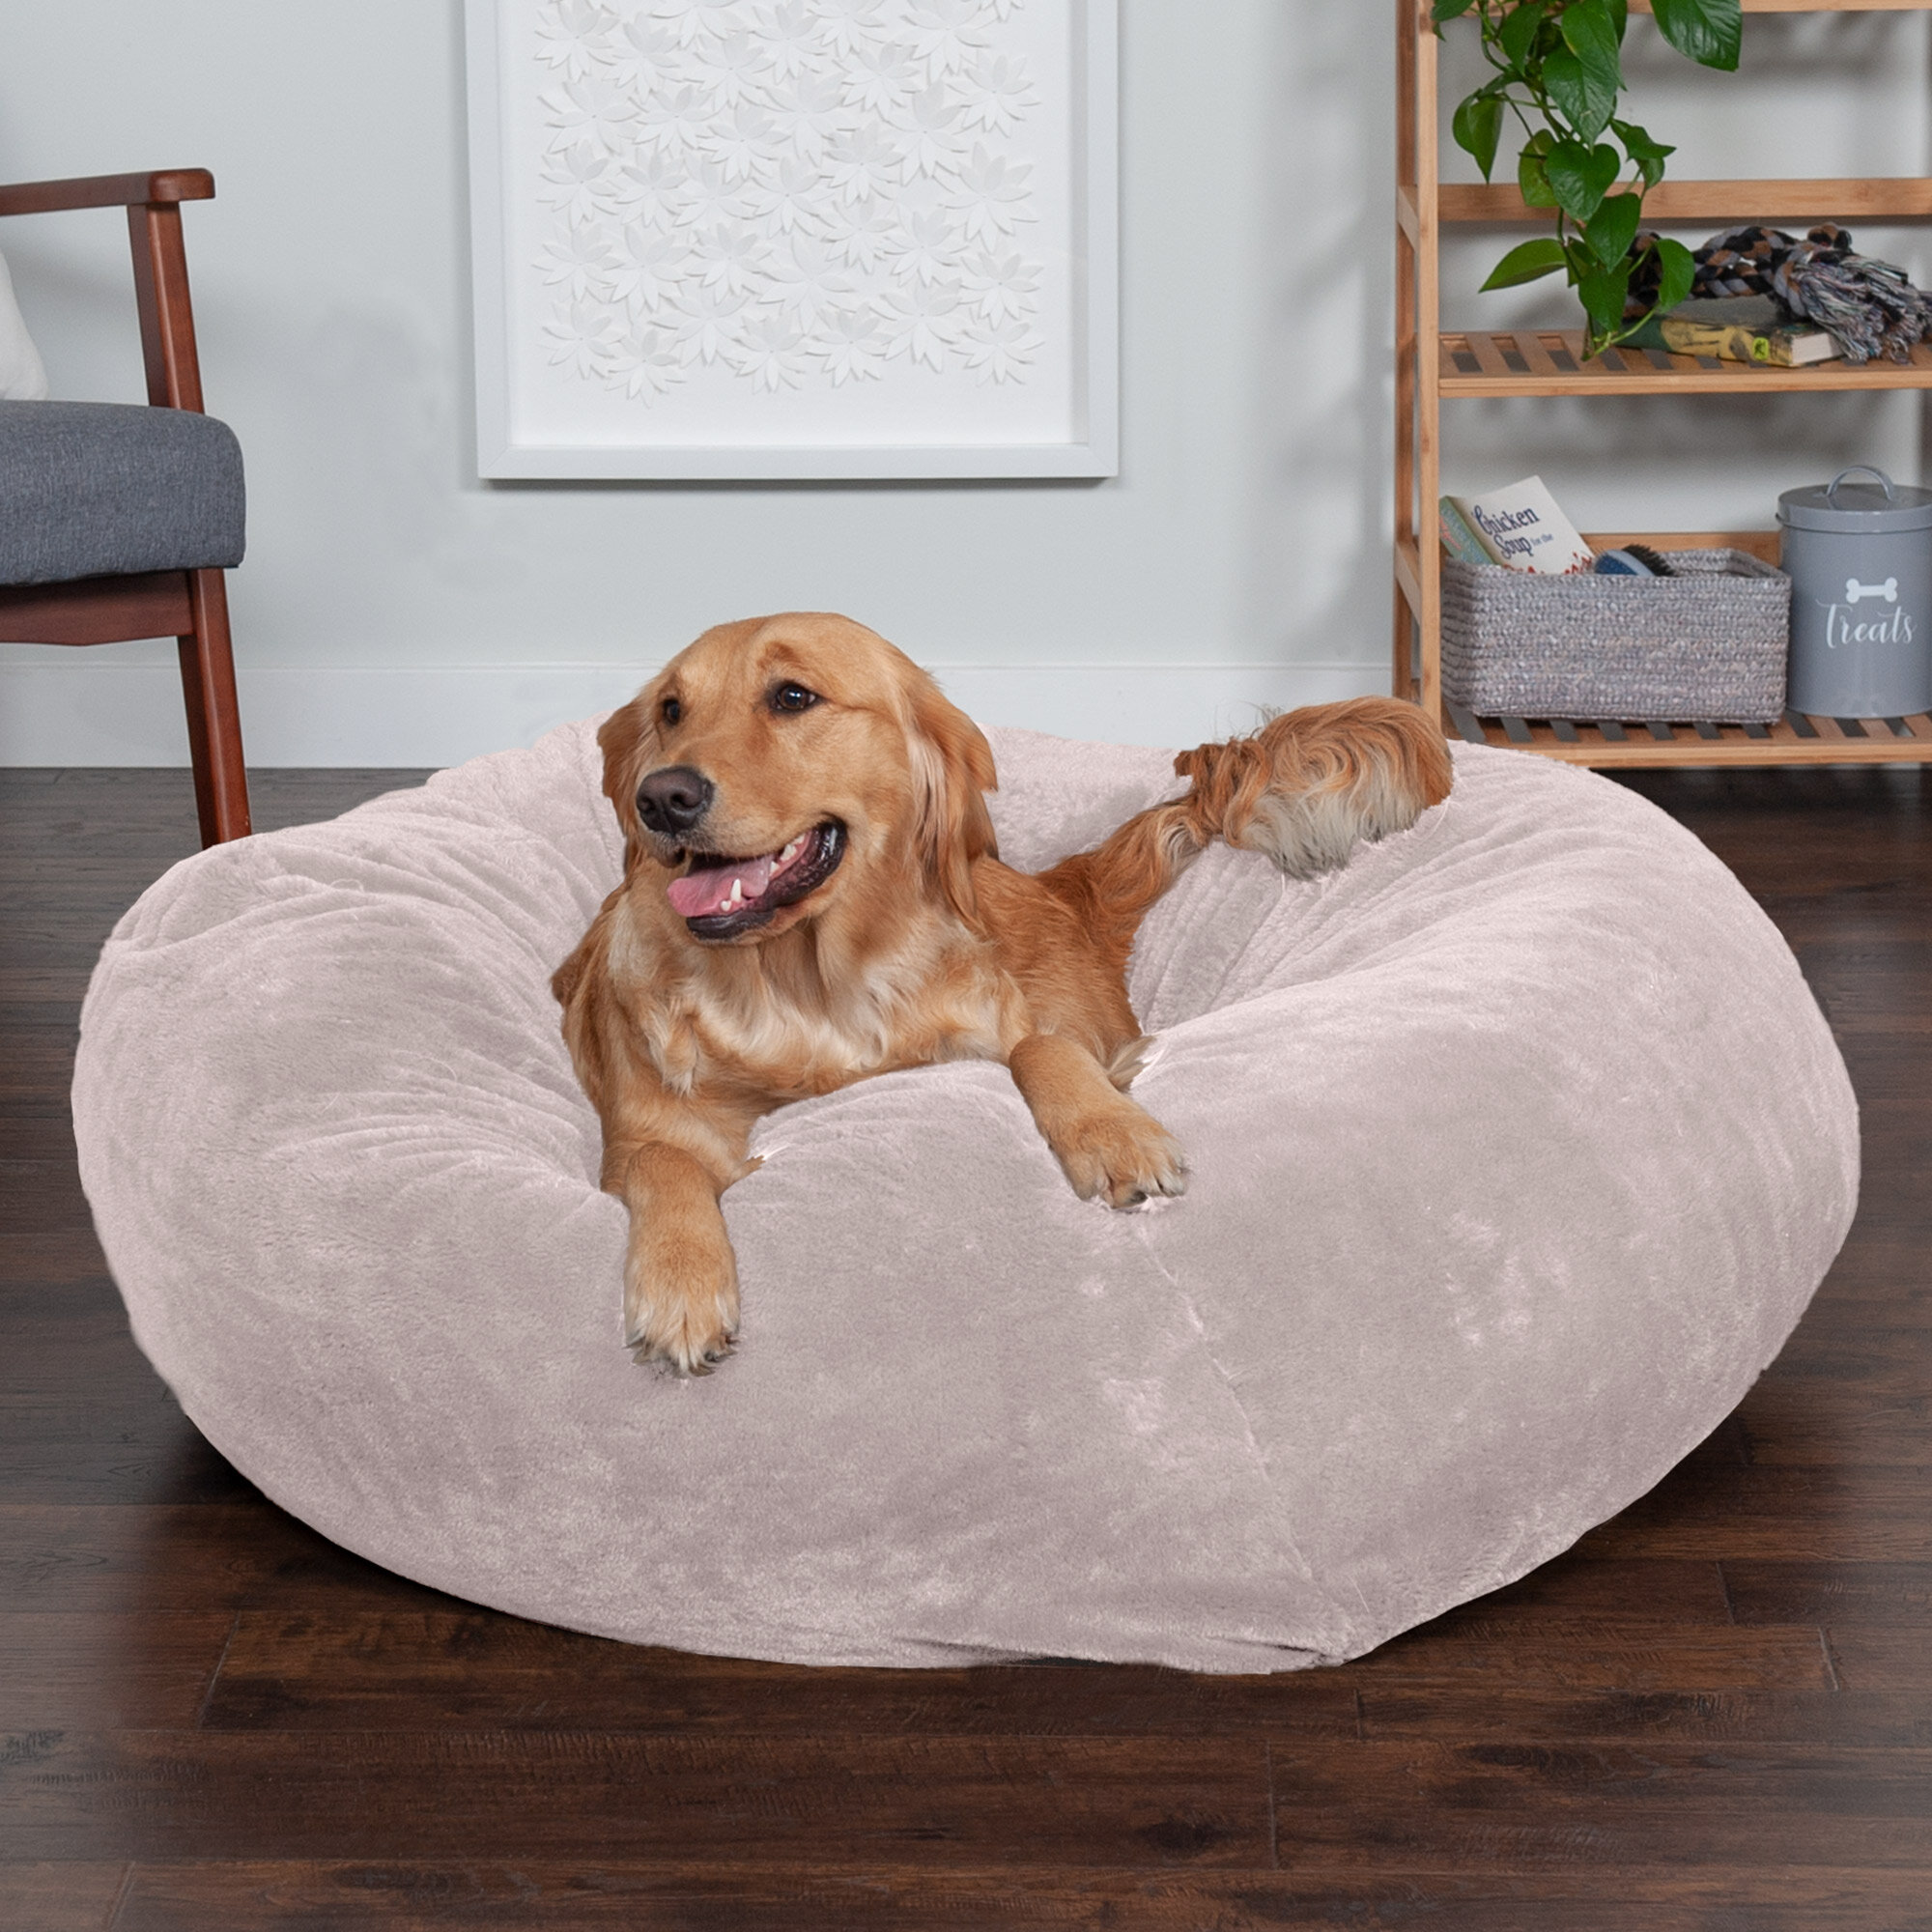 Bean Products Shredded Foam Fill - All New Recycled Refill for Bean Bags, Pet Beds, Pillows.